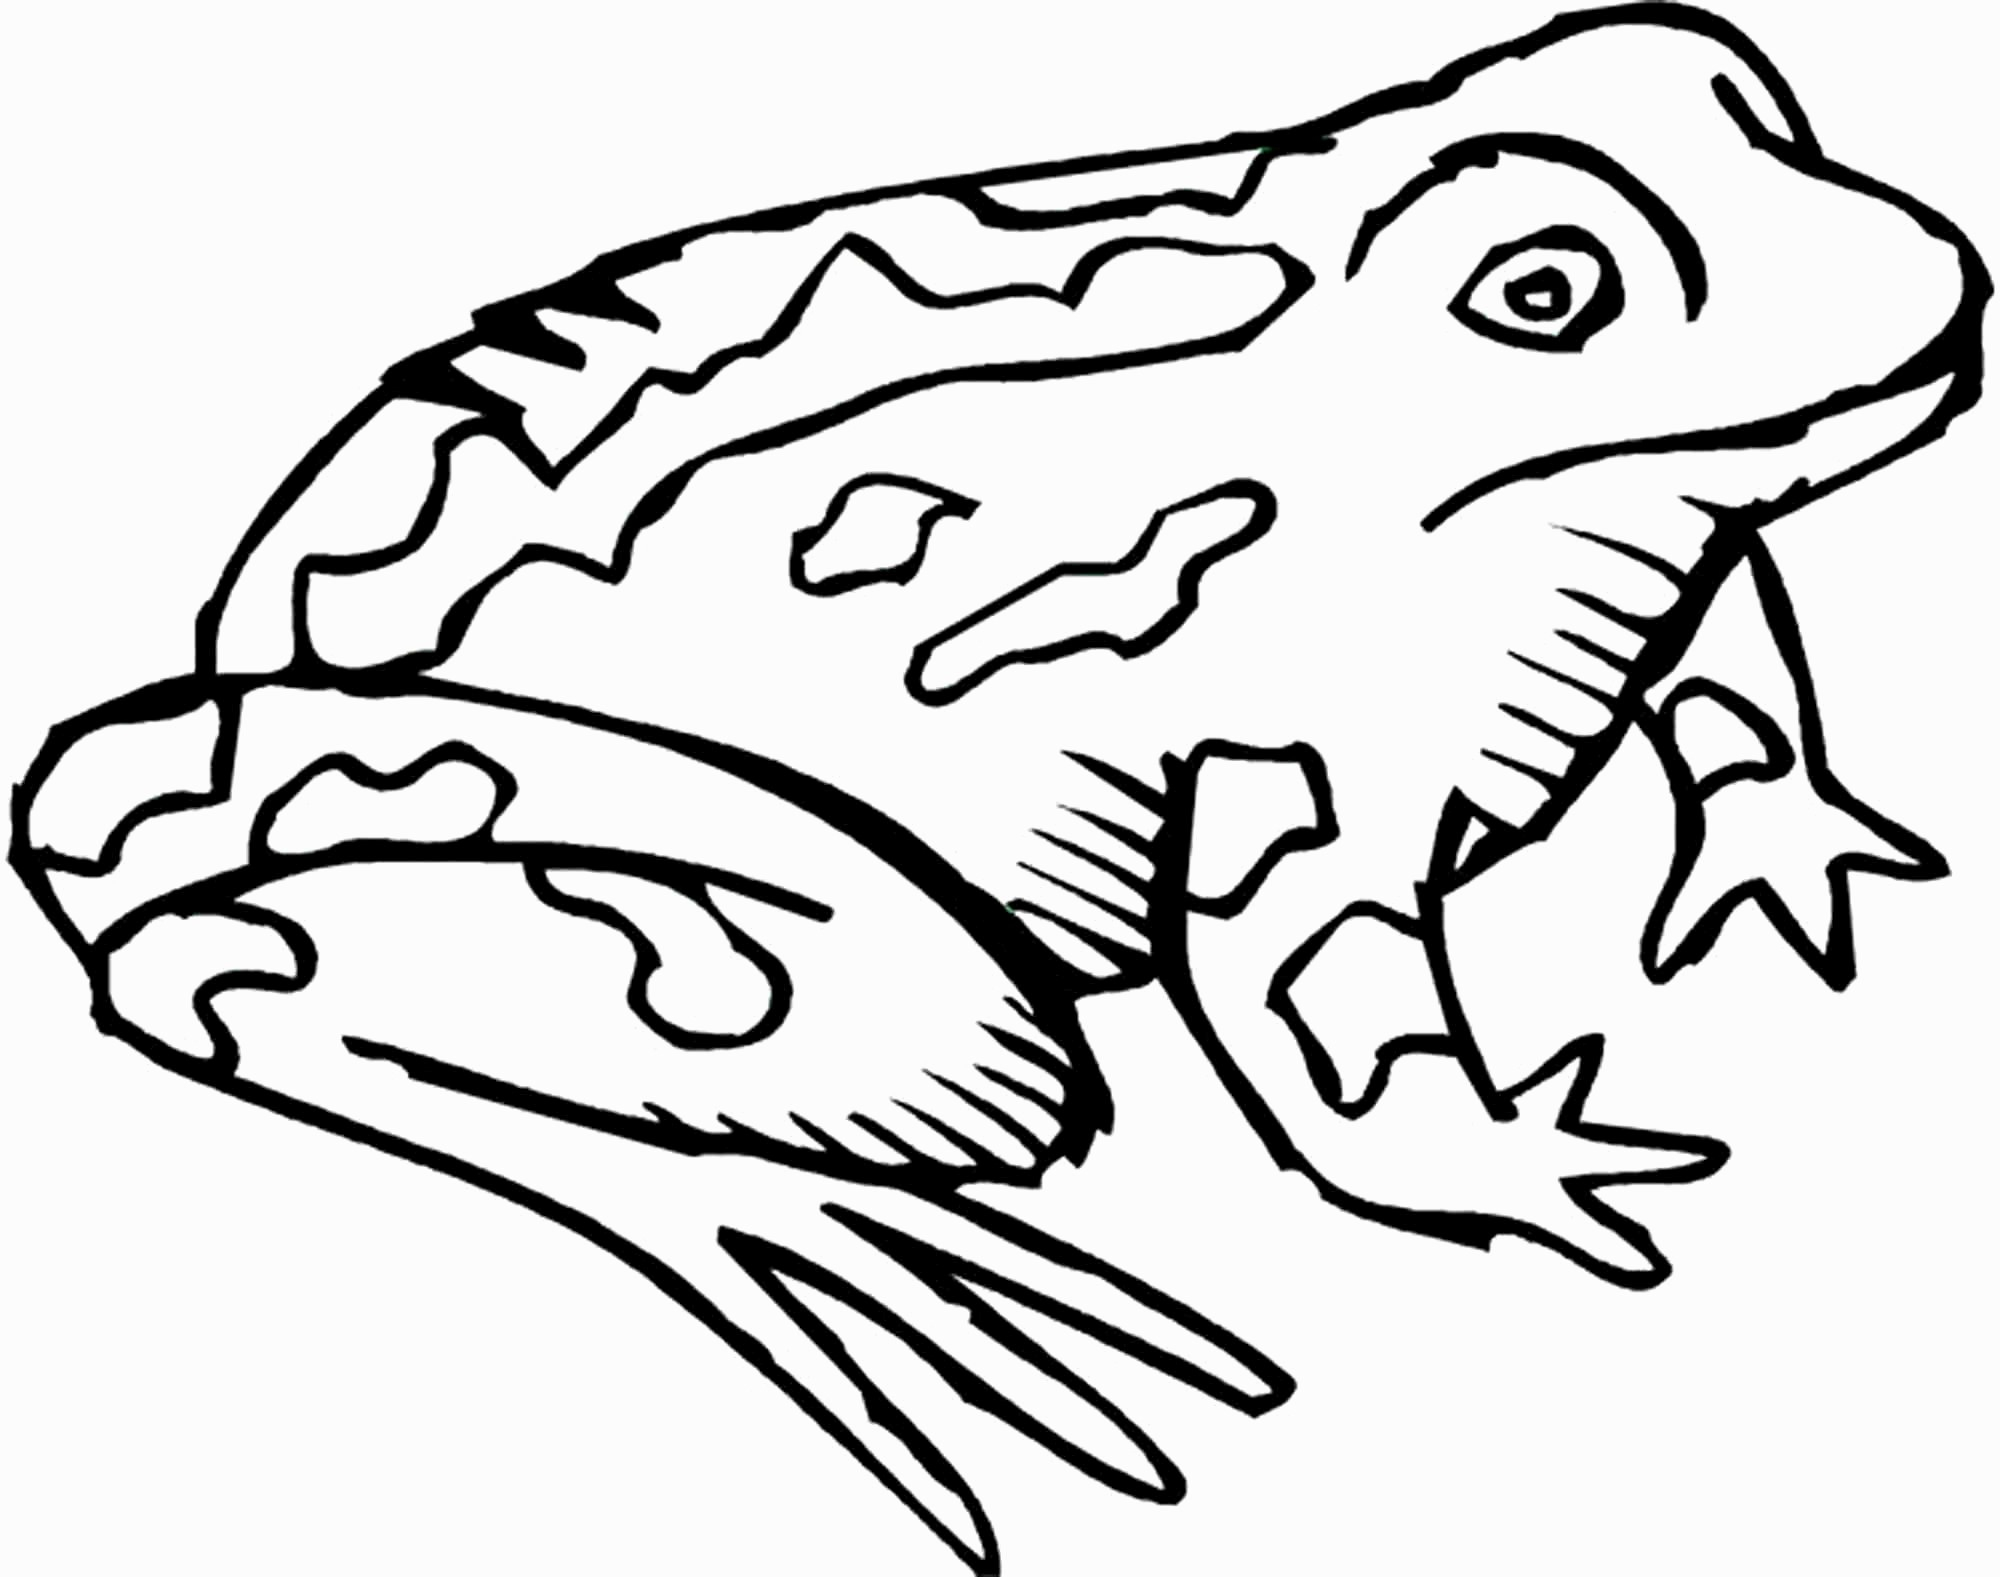 Toad And Toadette Coloring Pages Gecko Coloring Pages 15 Inspirational Toad Of Telematik Institut